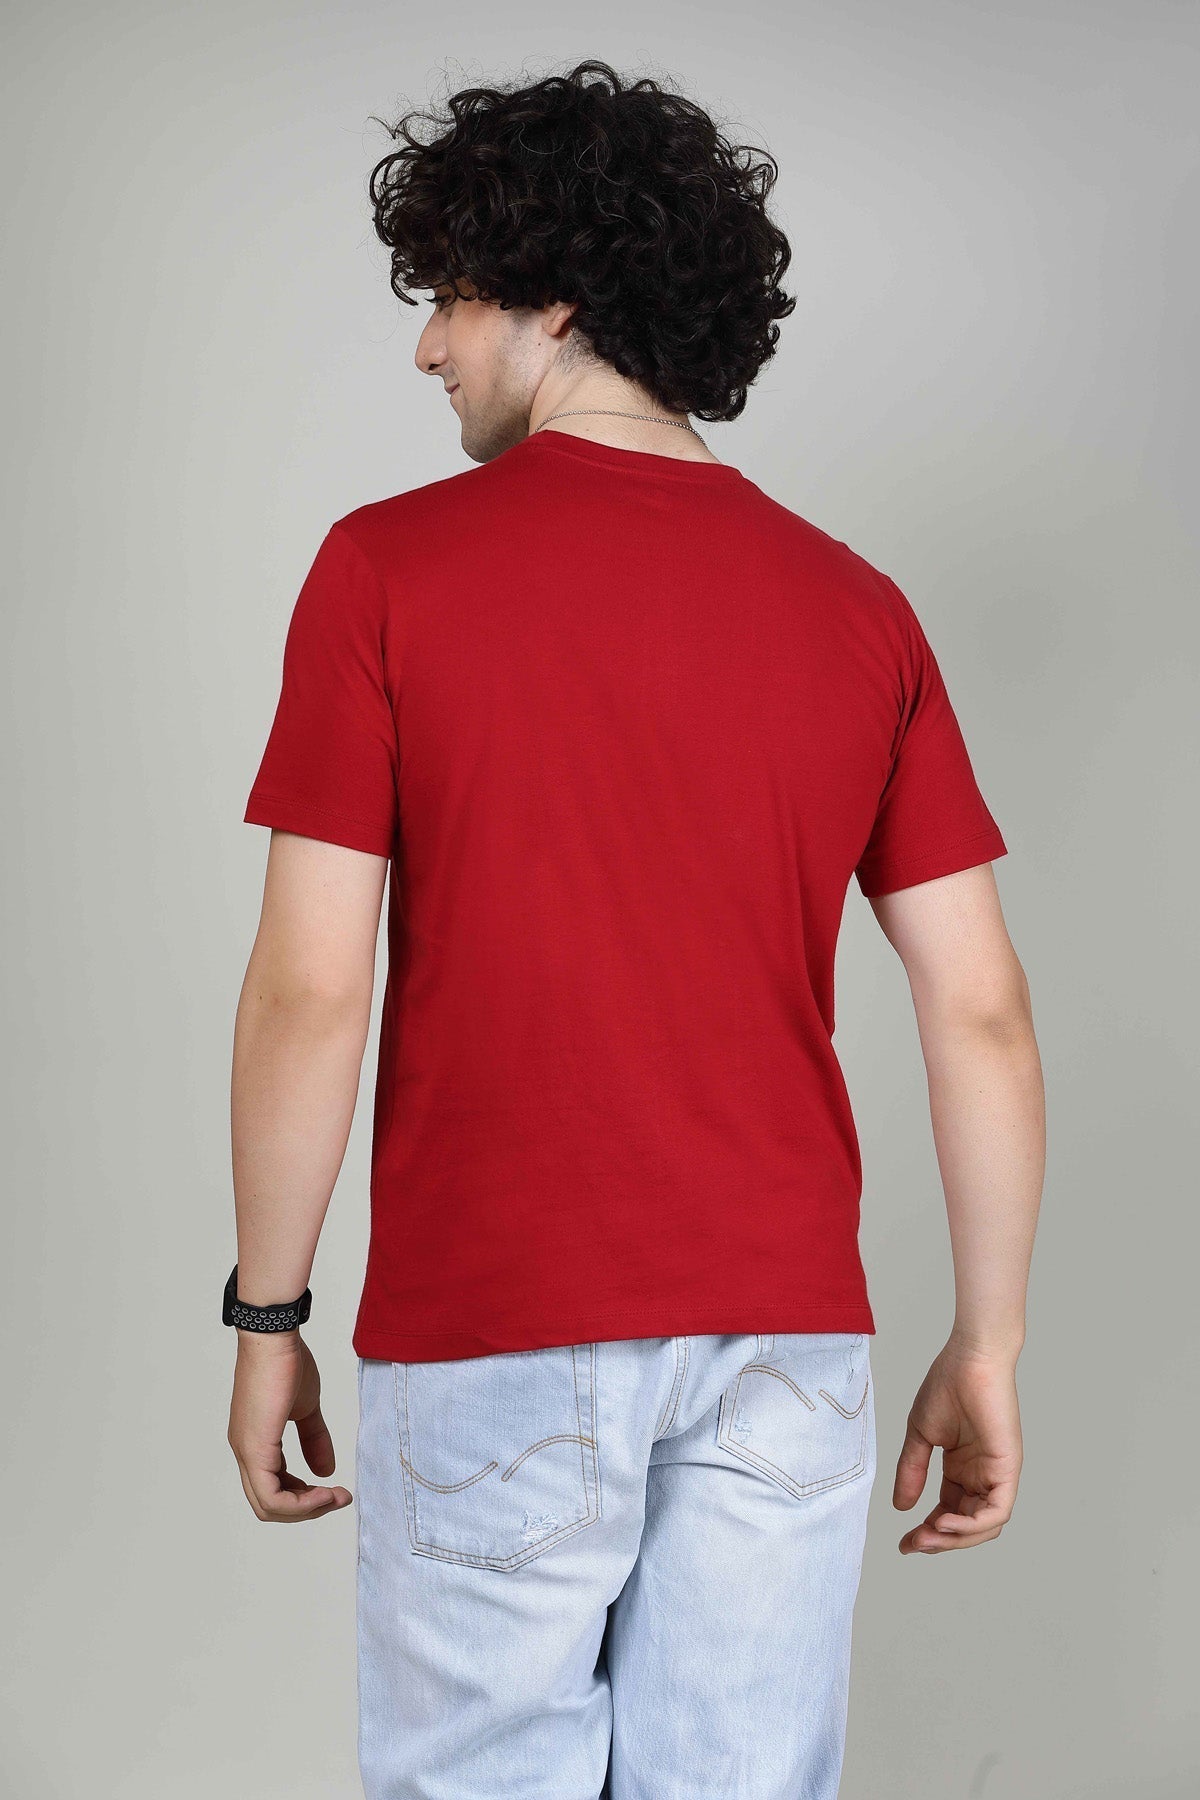 Knockout Red - Mens Half sleeves T- Shirt T-SHIRT LOVER